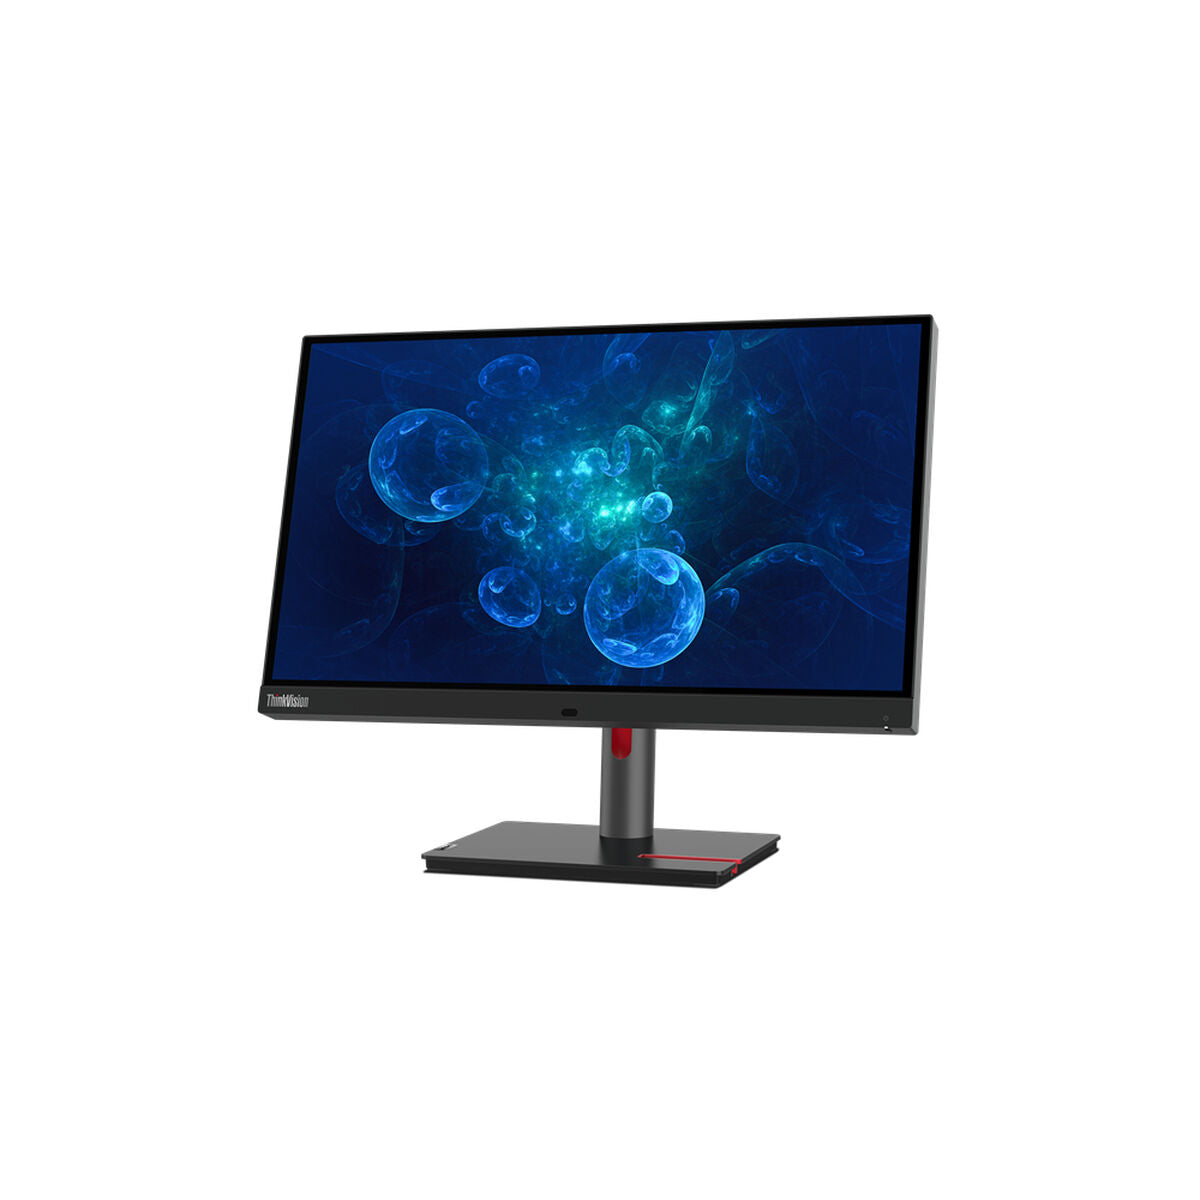 Gaming Monitor Lenovo ThinkVision P27PZ-30 4K Ultra HD 27" 60 Hz, Lenovo, Computing, gaming-monitor-lenovo-thinkvision-p27pz-30-4k-ultra-hd-27-60-hz, Brand_Lenovo, category-reference-2609, category-reference-2642, category-reference-2644, category-reference-t-19685, category-reference-t-19902, computers / peripherals, Condition_NEW, office, Price_+ 1000, Teleworking, RiotNook